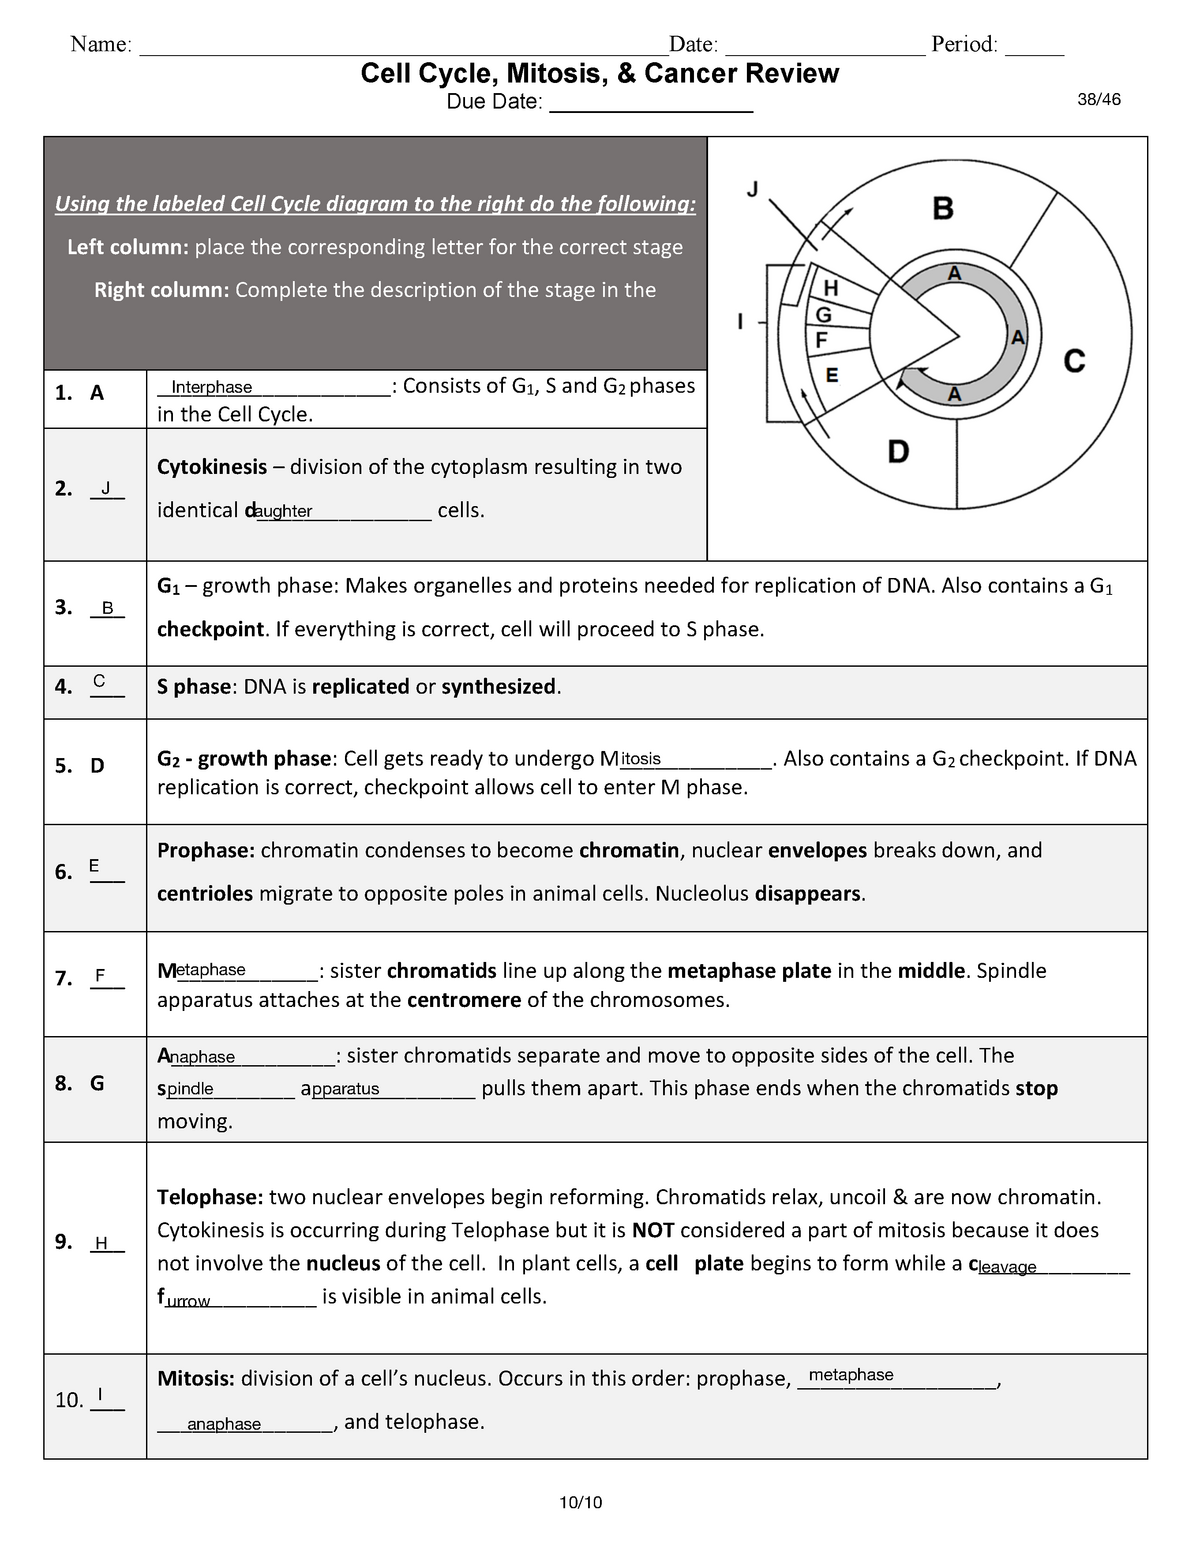 Cell cycle, Mitosis and Cancer review - SCIBUS 20 - Science and Throughout Cell Cycle And Mitosis Worksheet